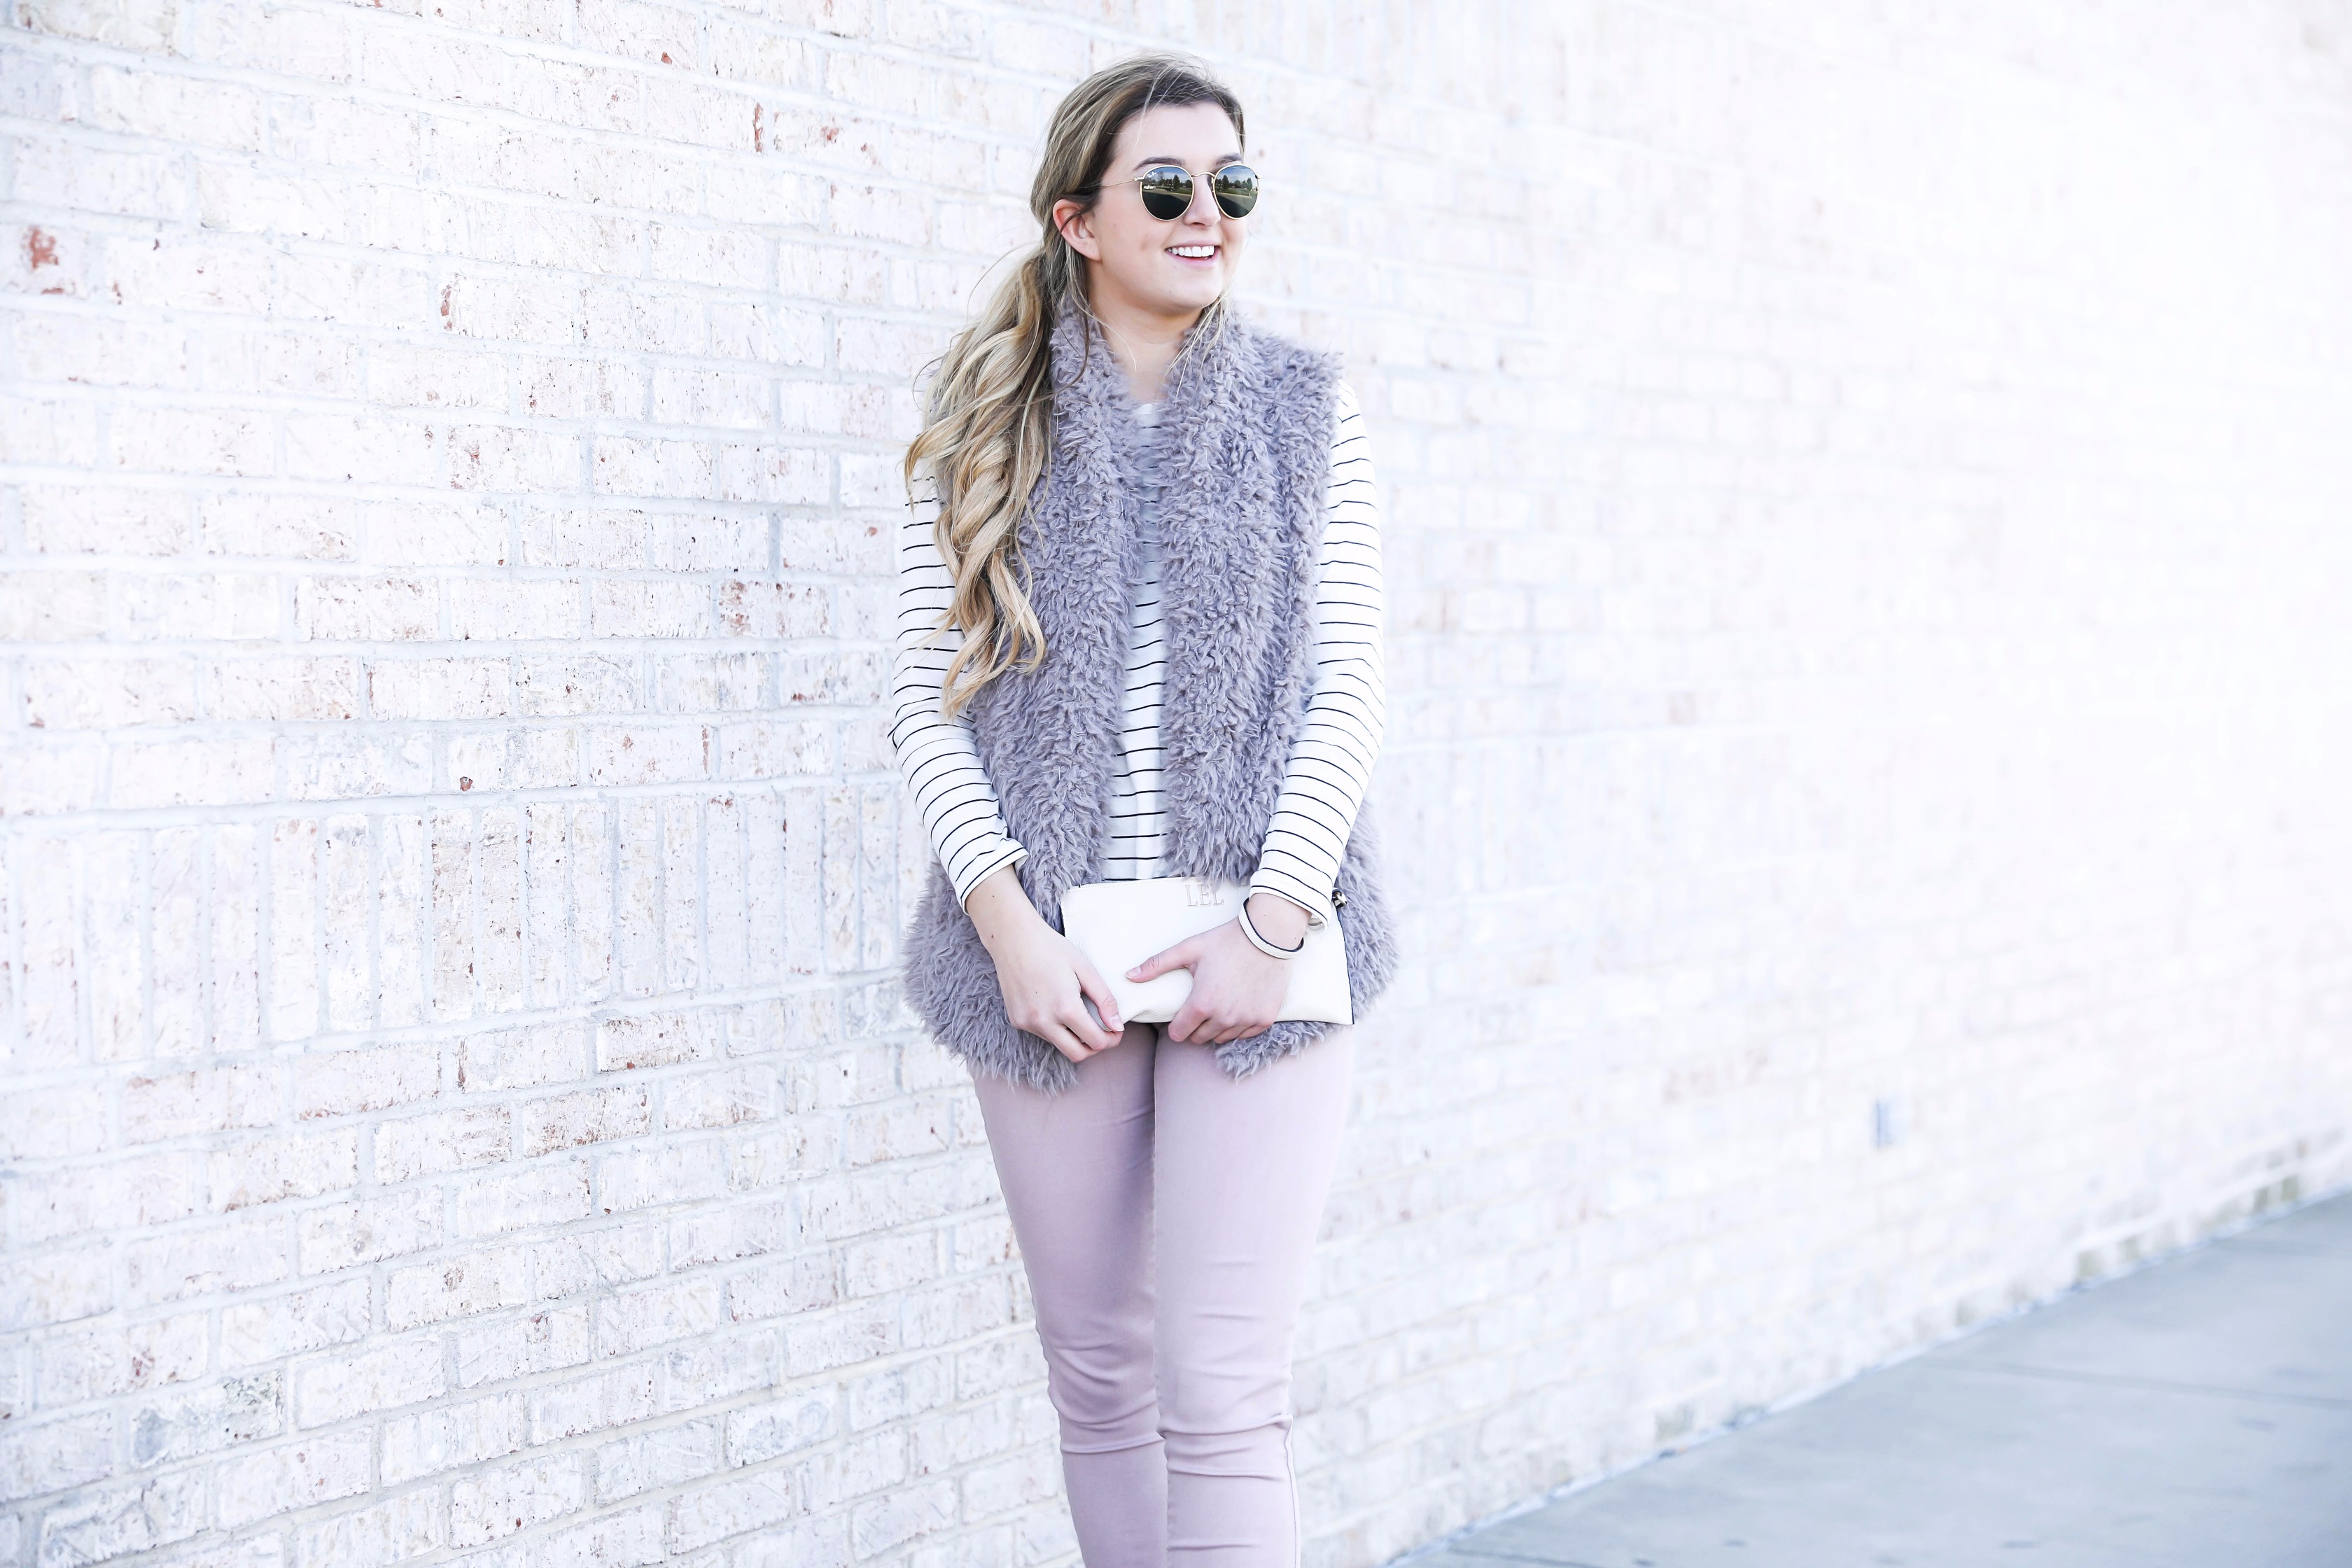 Striped long sleeve t-shirt and faux fur vest with pink pants! Details on fashion blog daily dose of charm by lauren lindmark